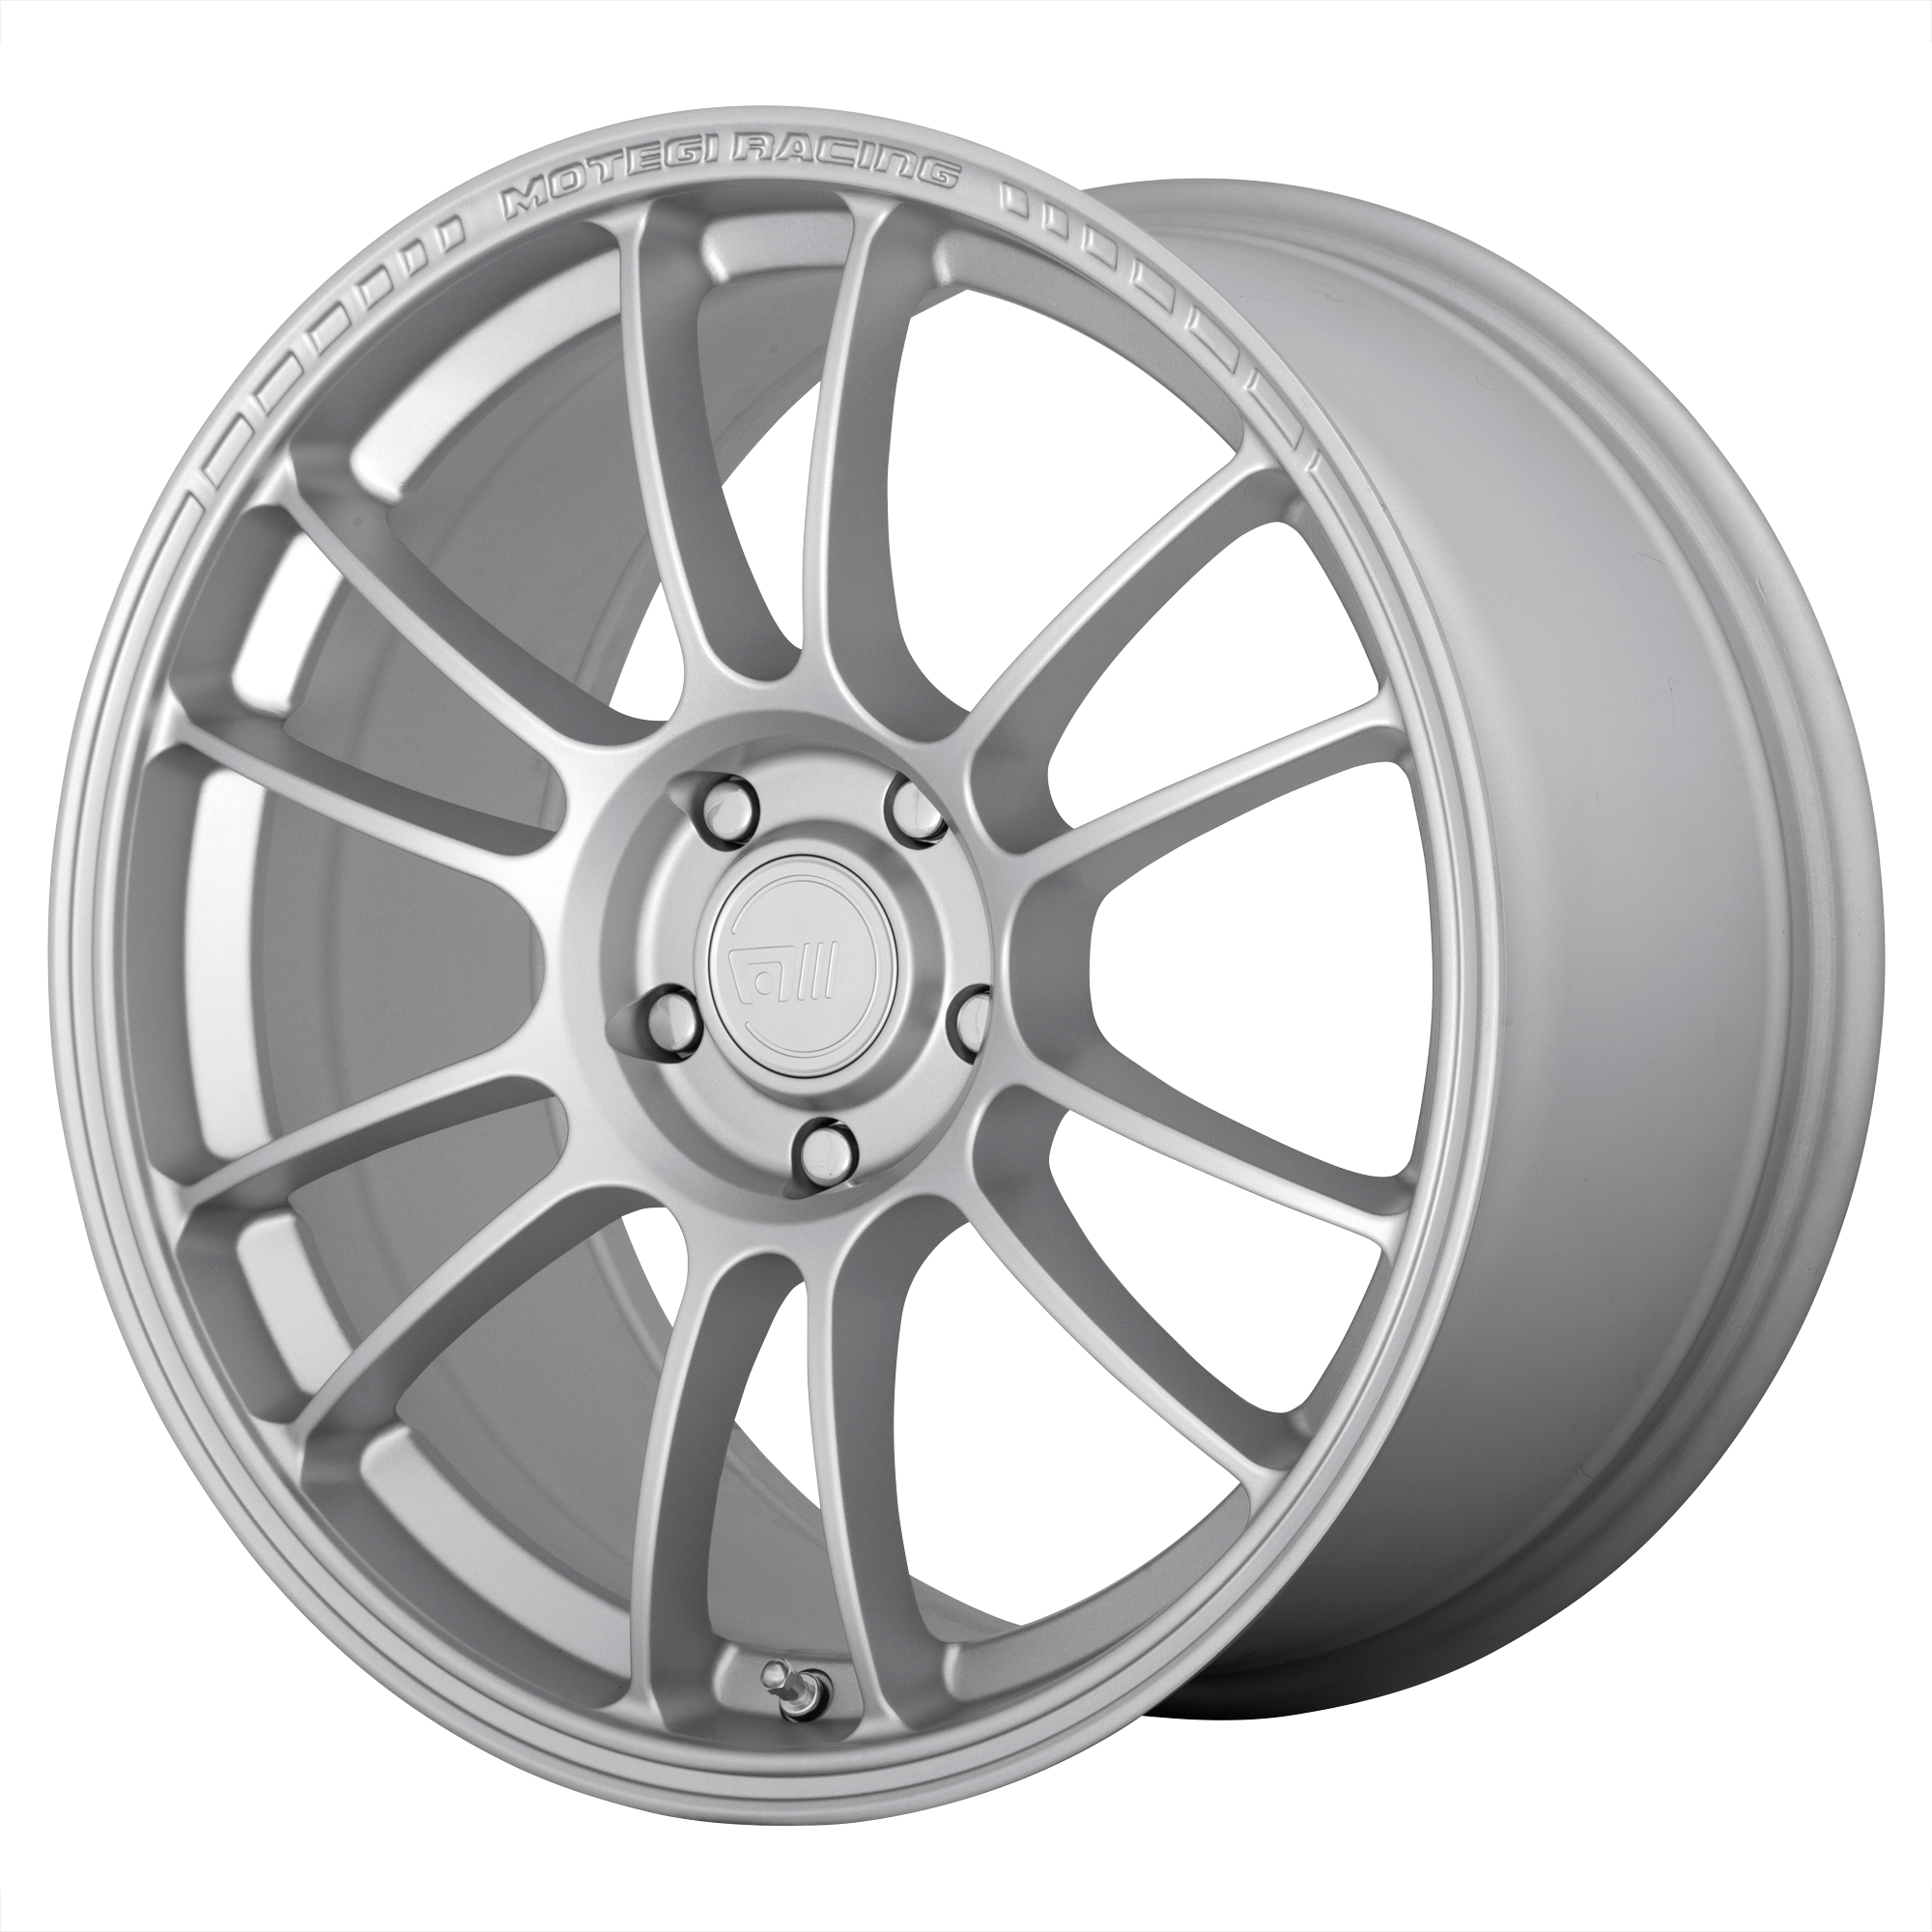 SS6 17x8.5 5x114.30 HYPER SILVER (35 mm) - Tires and Engine Performance